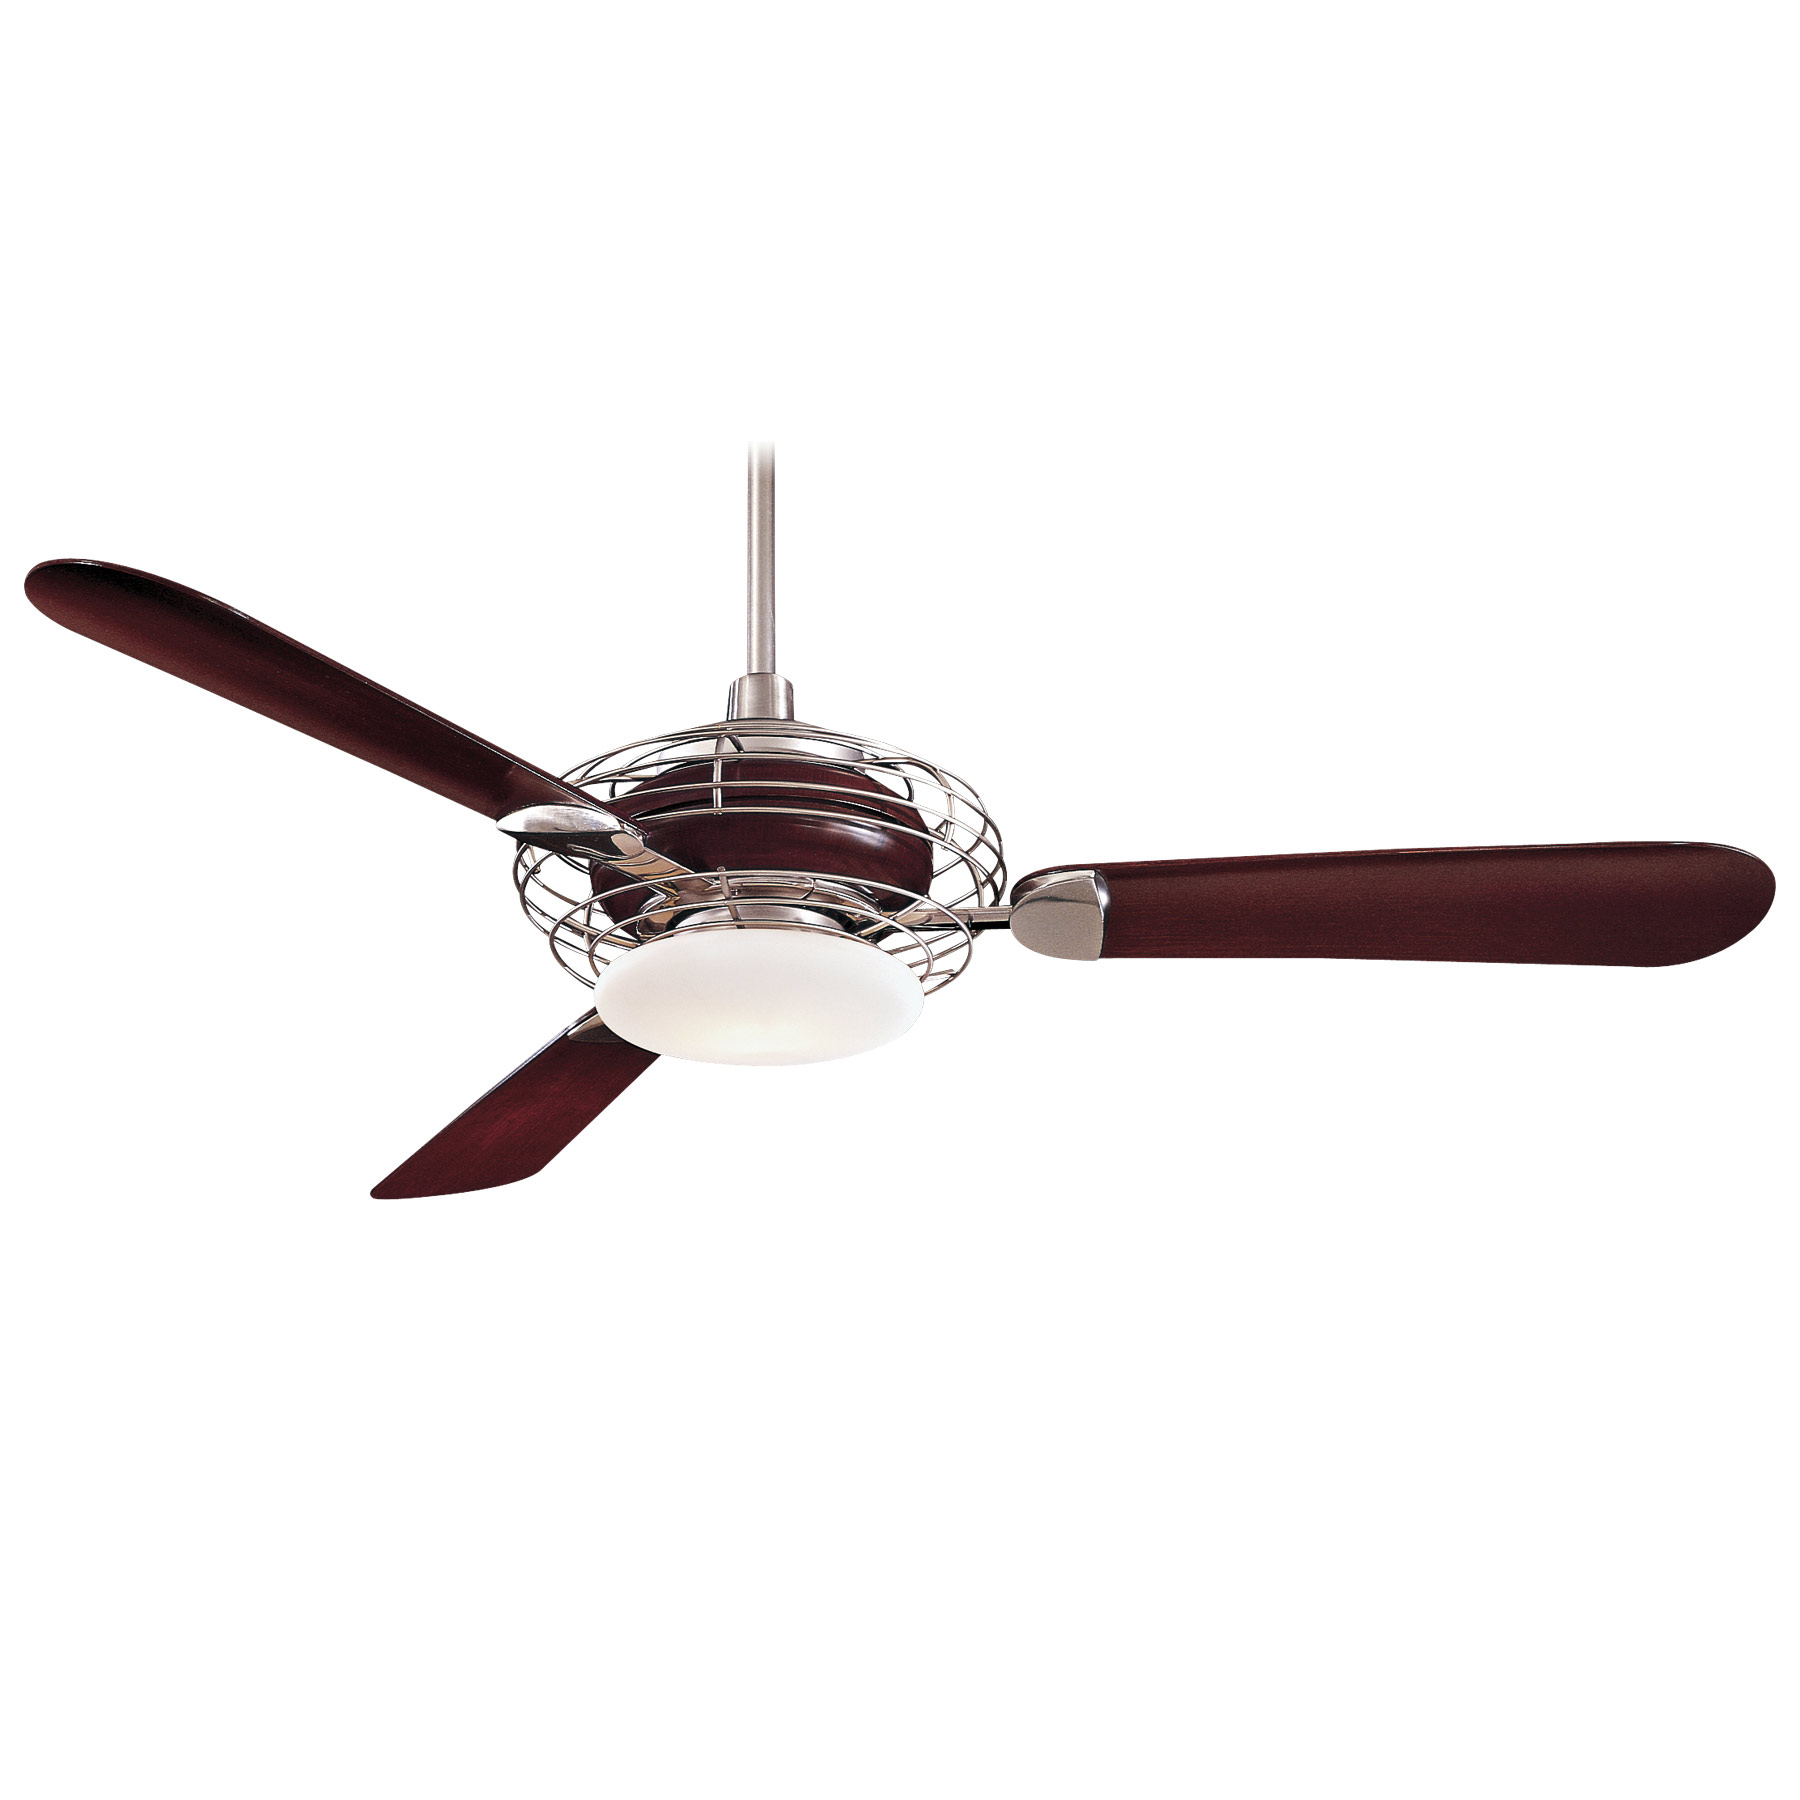 Acero Ceiling Fan With Light By Minka Aire F601 Bs Mg